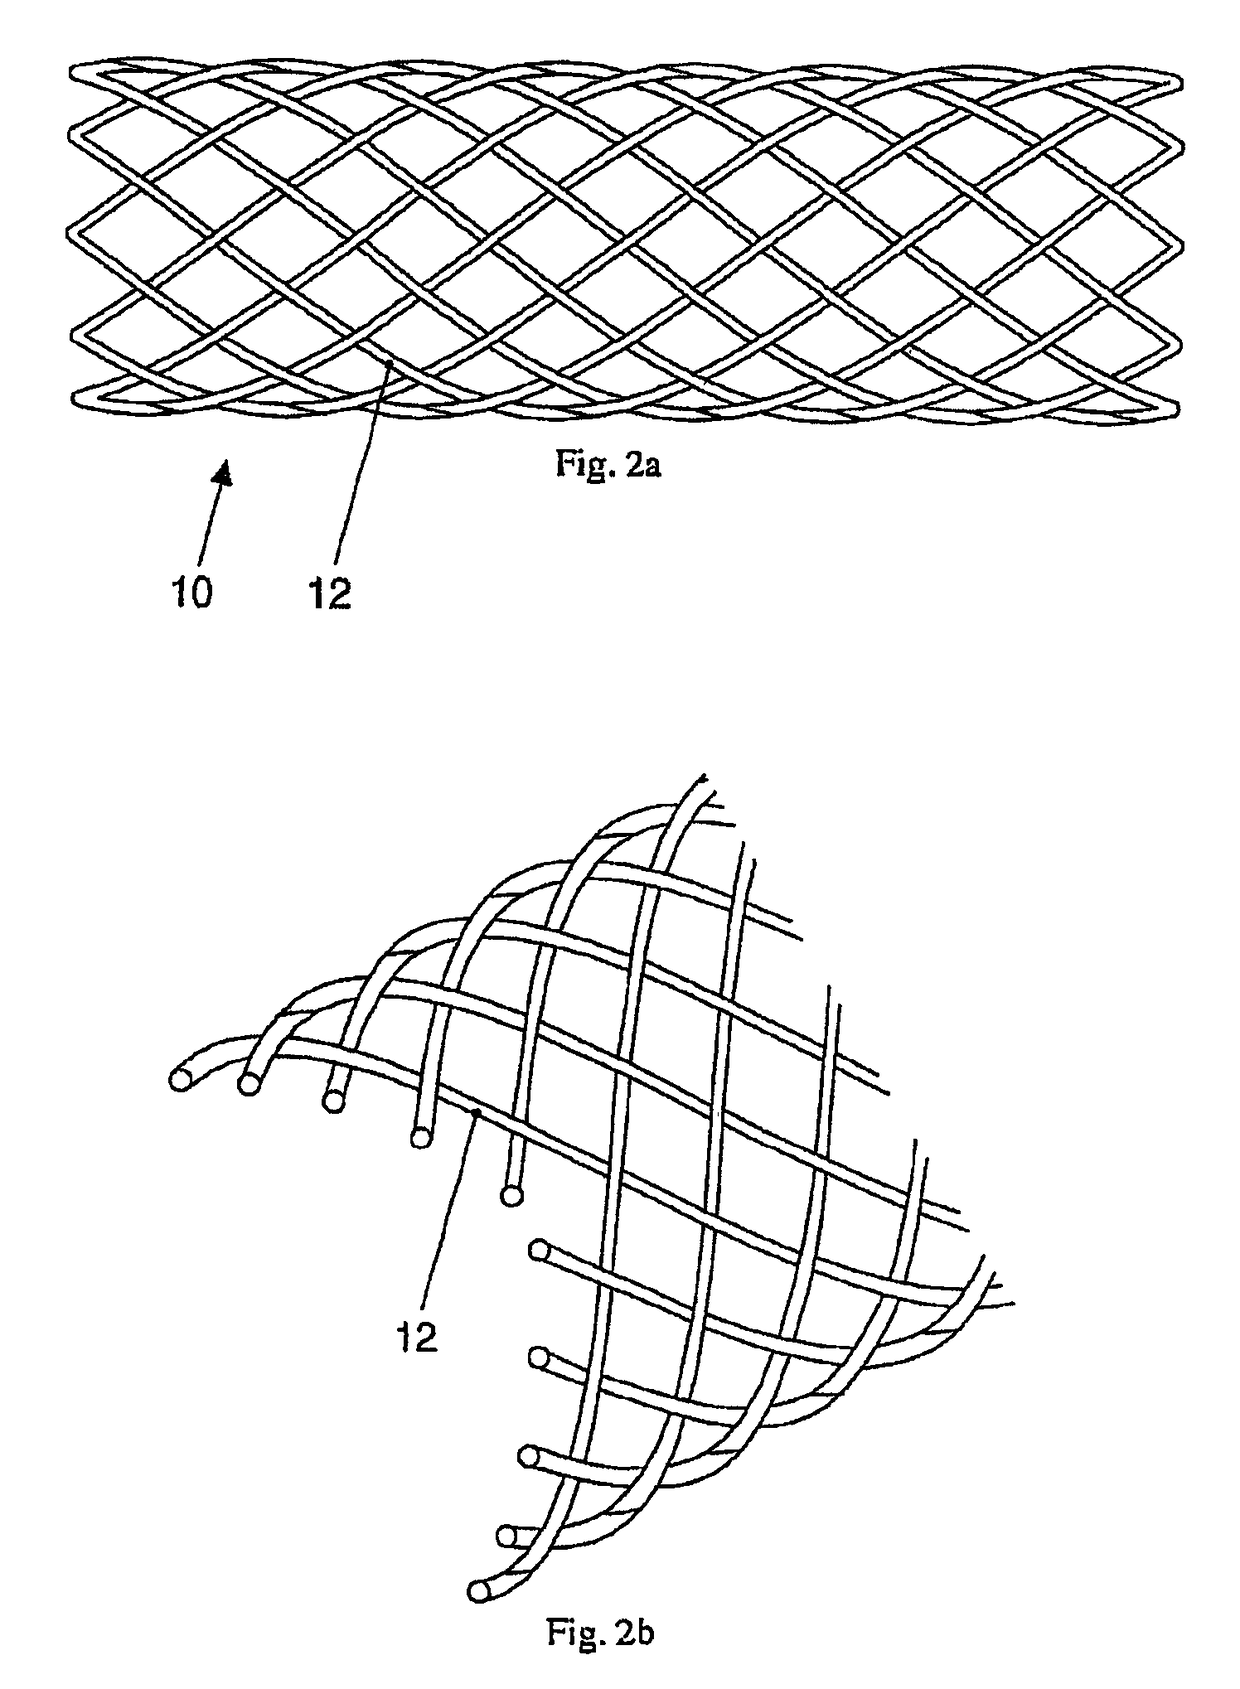 Absorbable medical implant made of fiber-reinforced magnesium or fiber-reinforced magnesium alloys